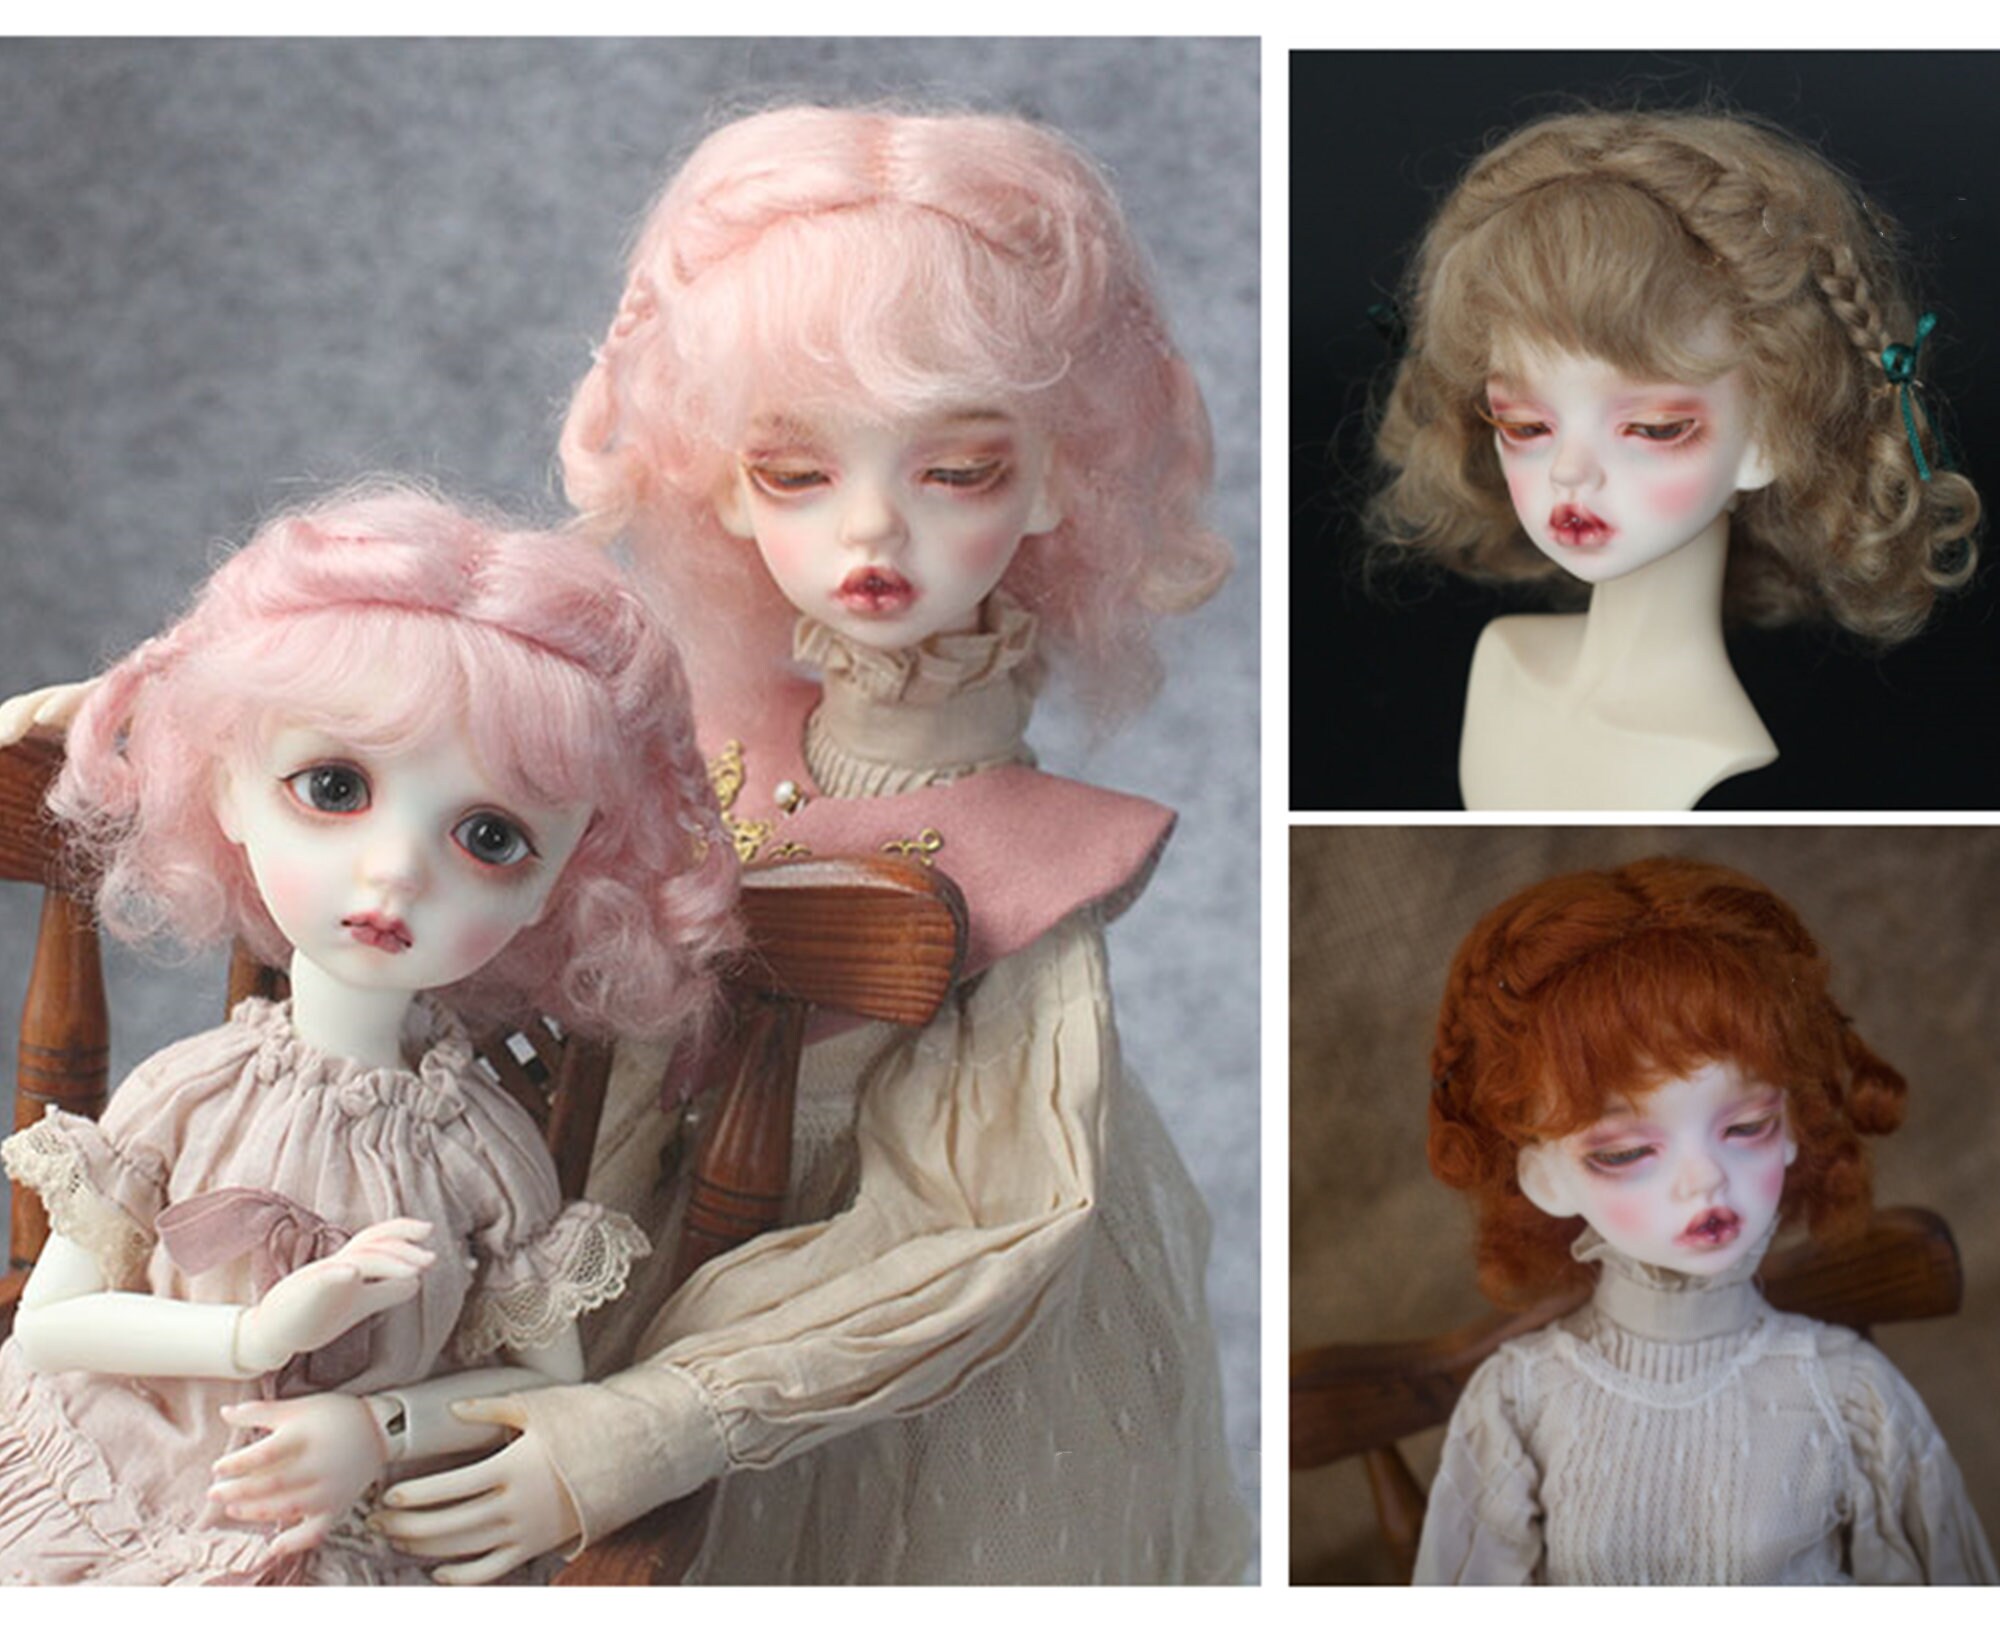 1. "BJD Doll with Long Blonde Hair" - wide 4